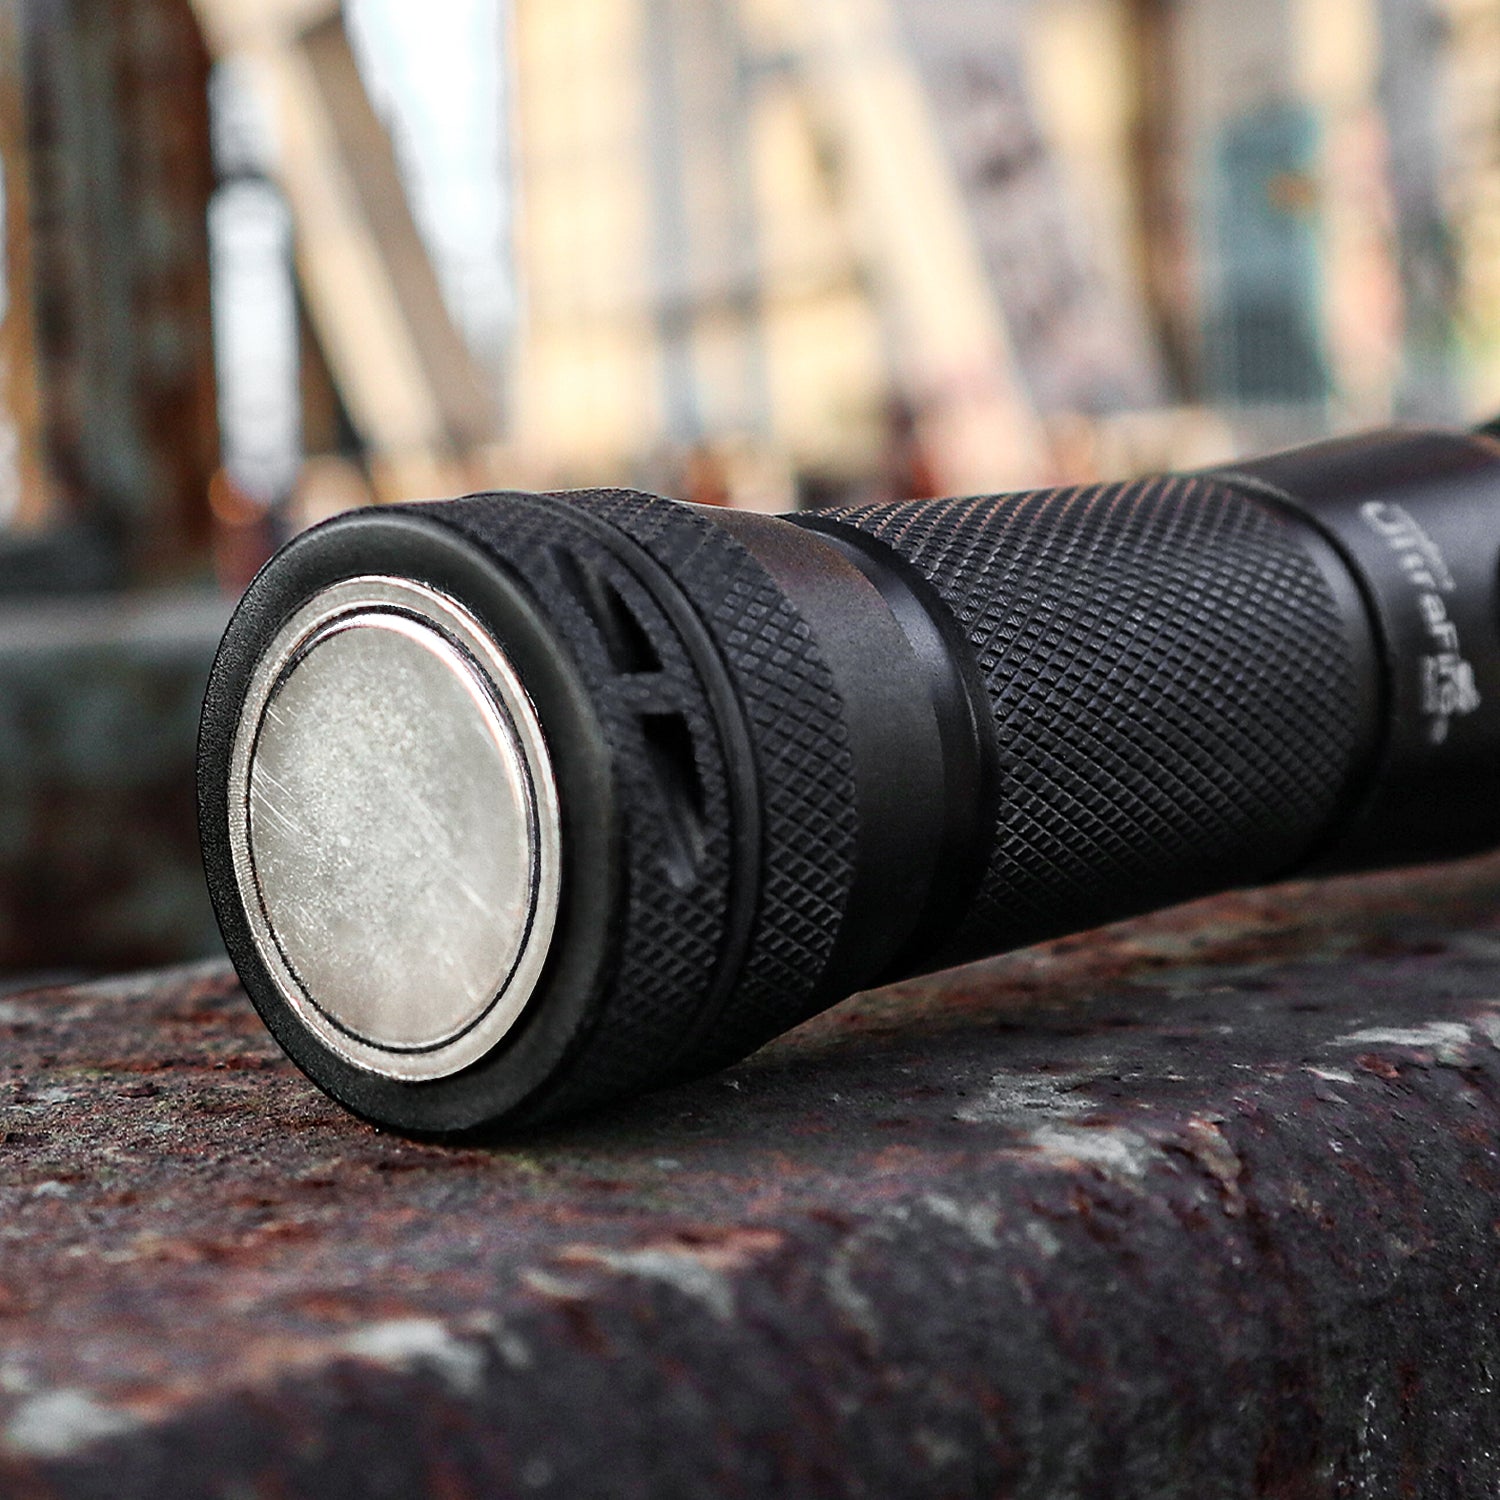 UltraFire Classic A200 Zoomable Flashlight